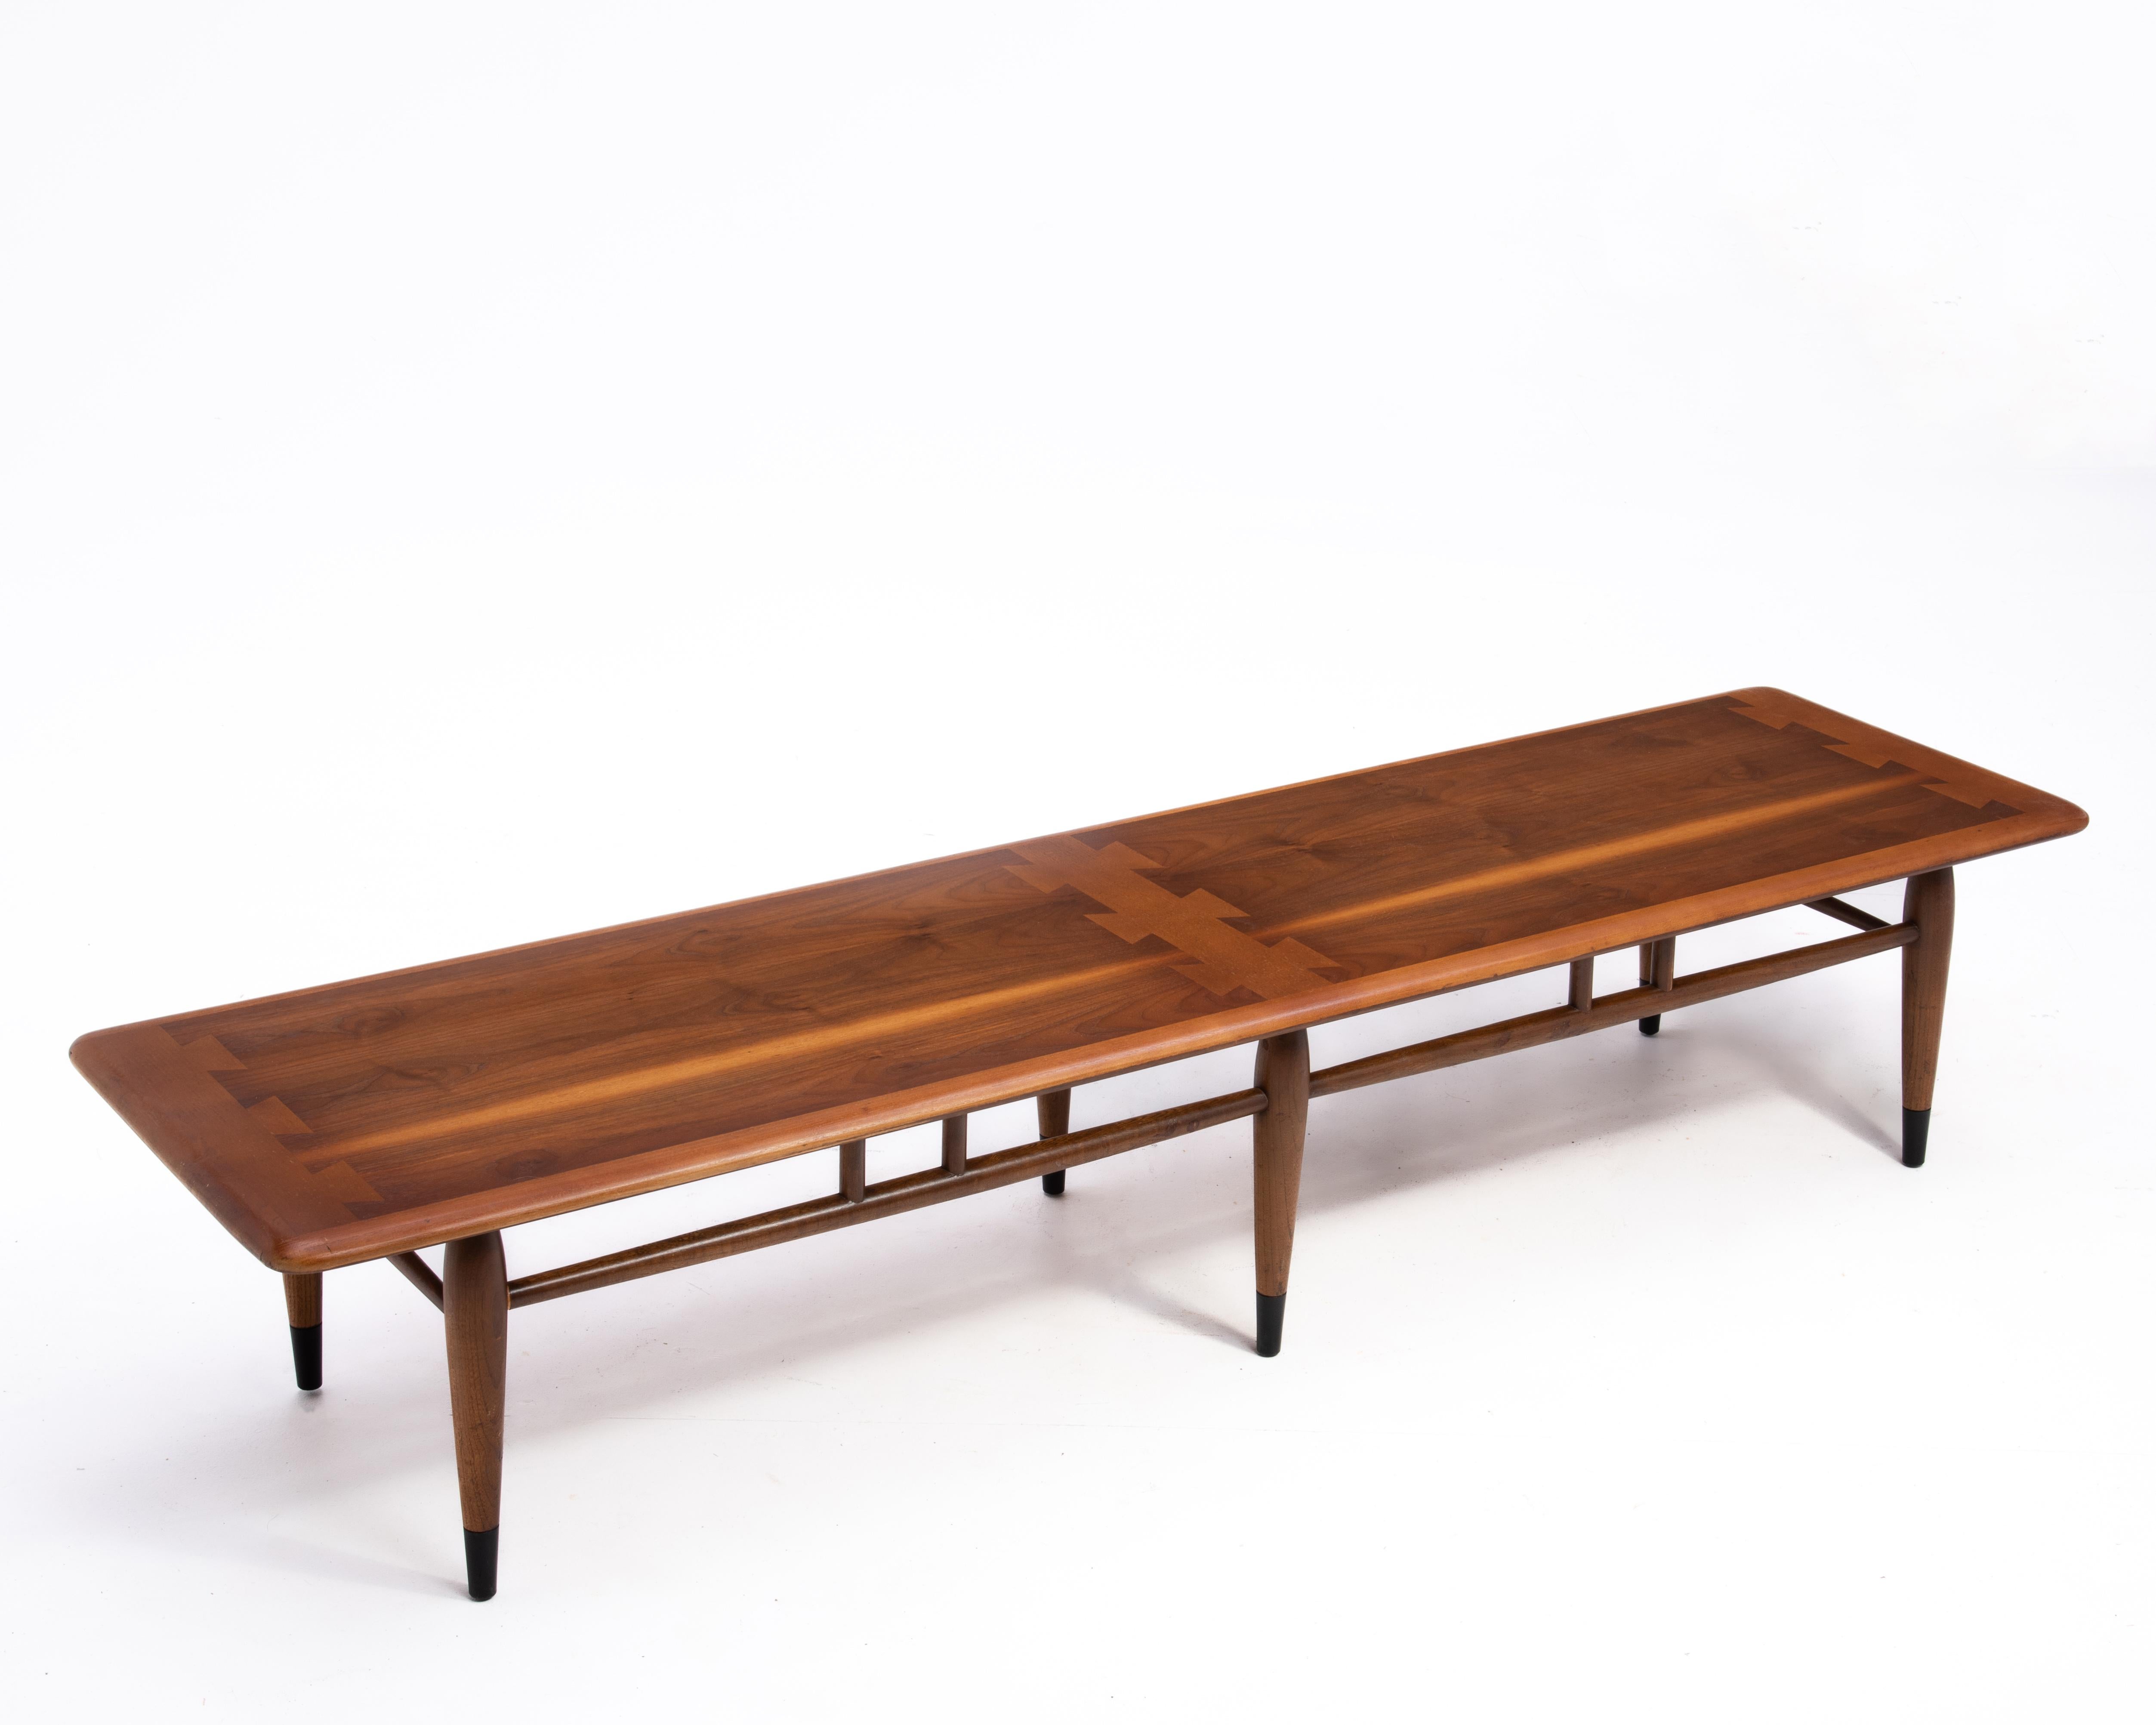 Late 20th Century Mid-Century Modern Lane Acclaim Walnut Coffee Table Andre Bus Style 900 09